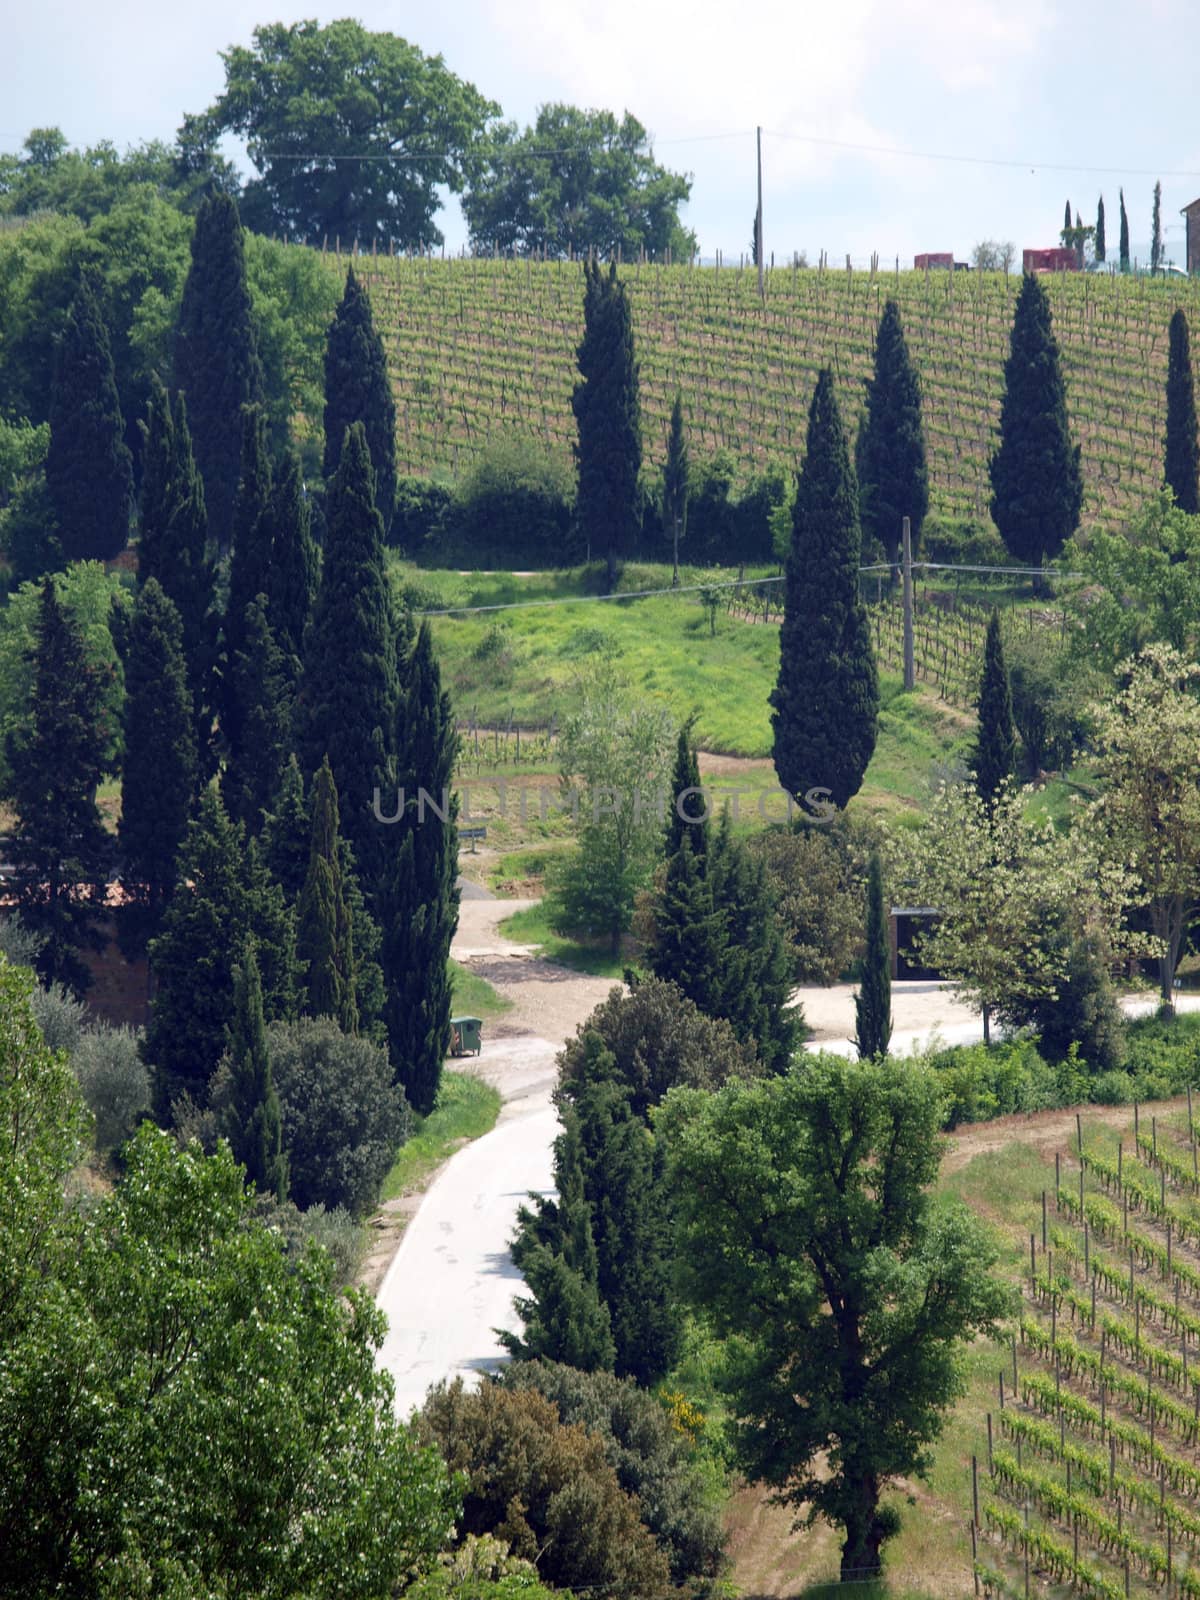 Tuscan landscape with vineyards and cypresses by wjarek